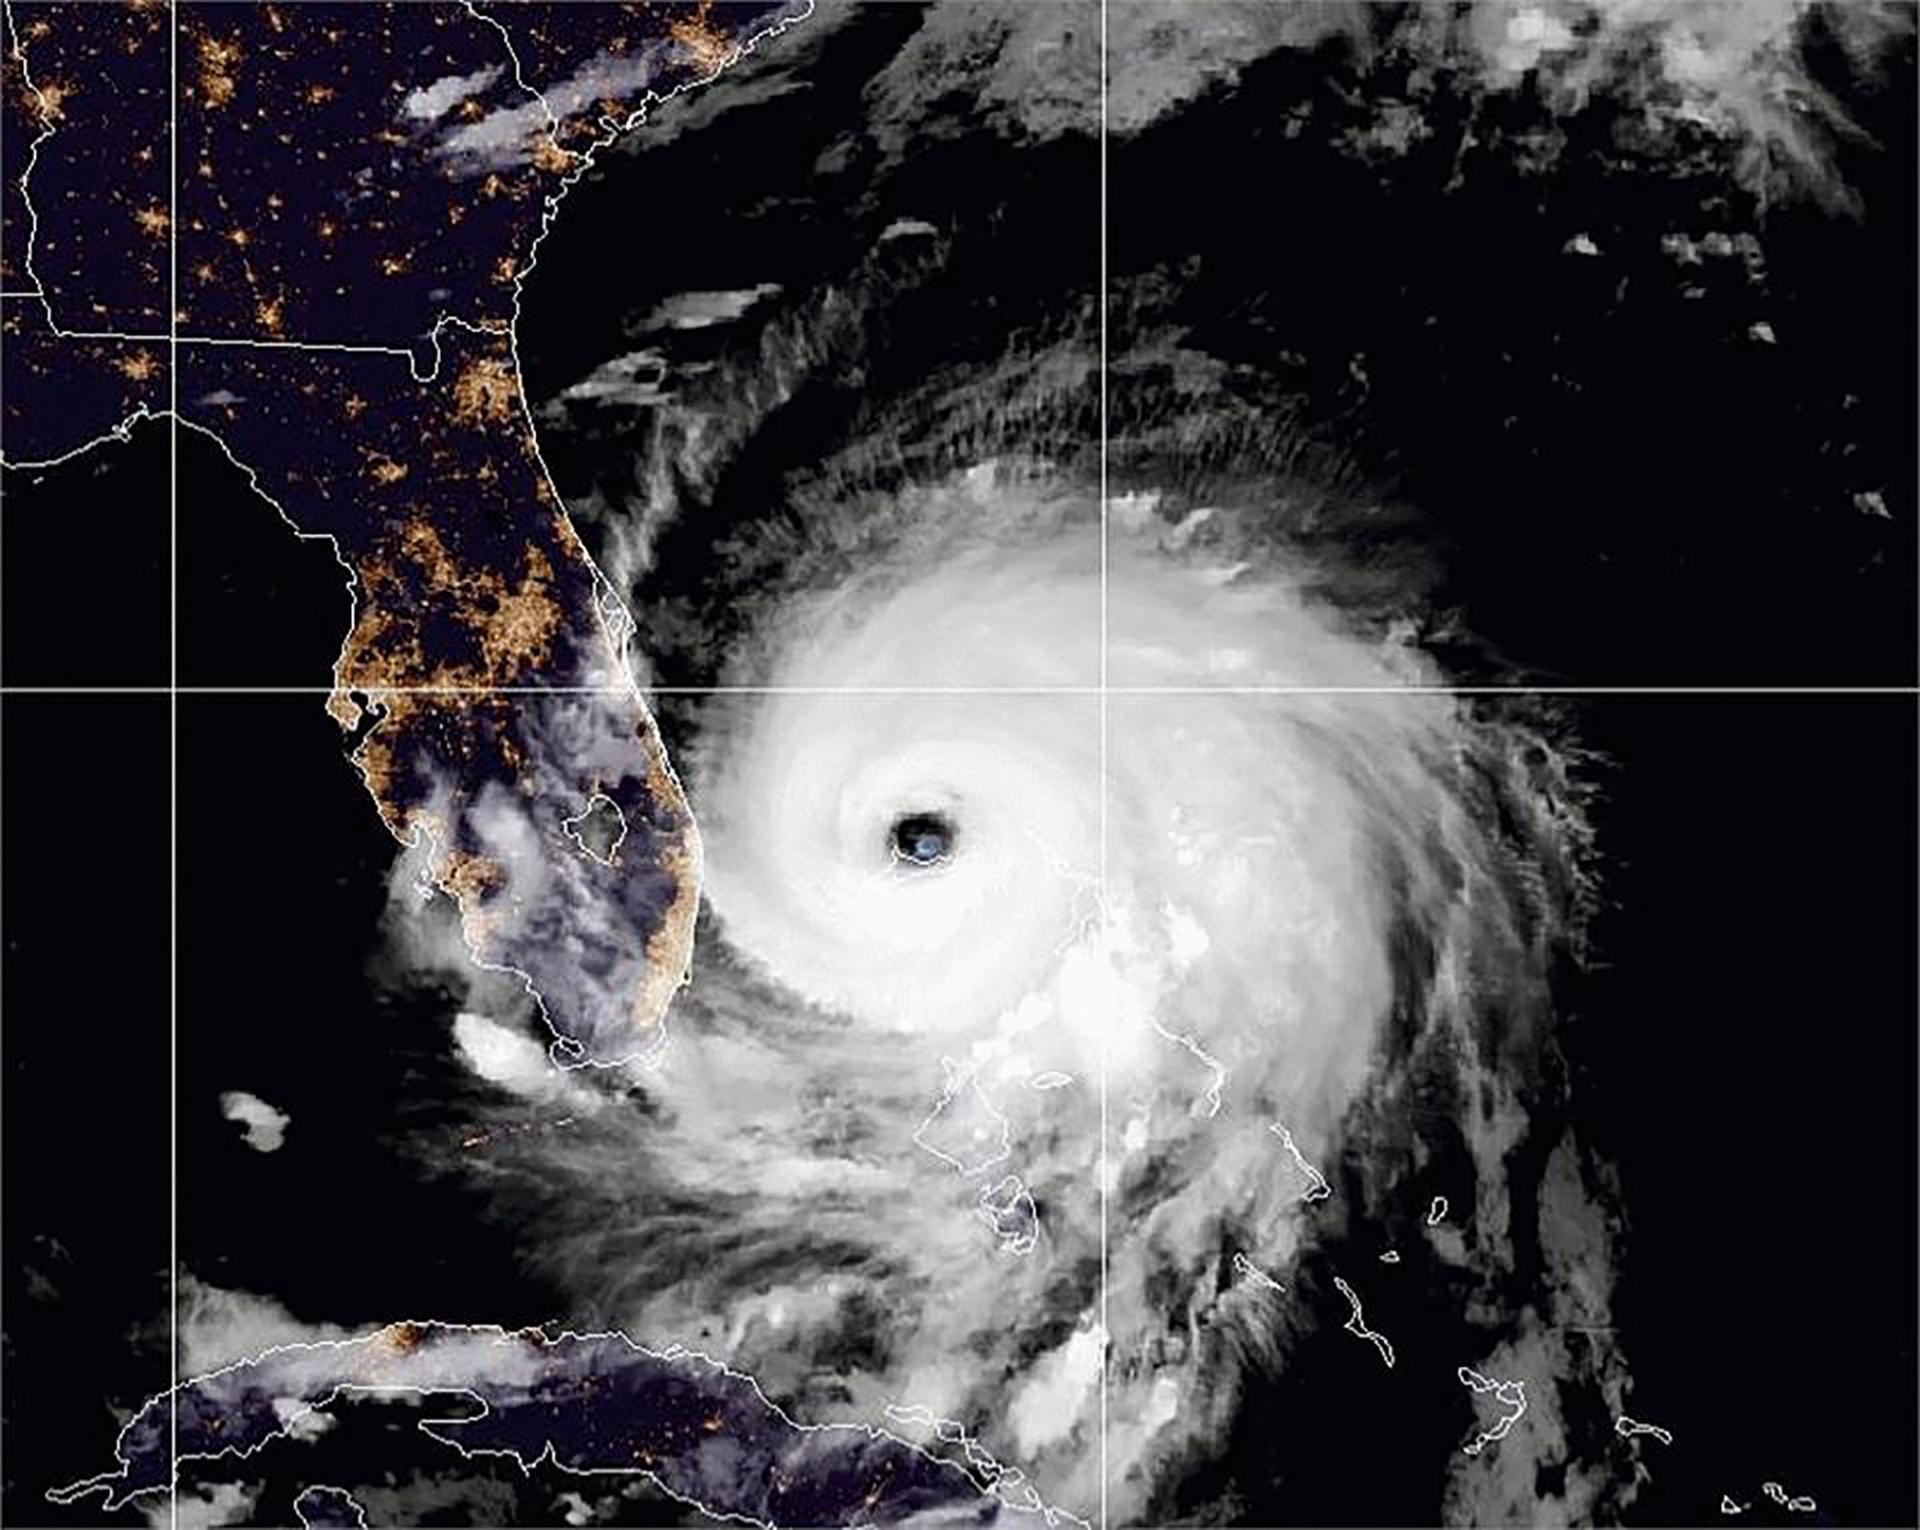 A satellite image shows the outline of Florida with the large spiral of Hurricane Dorian adjacent to the east coast.